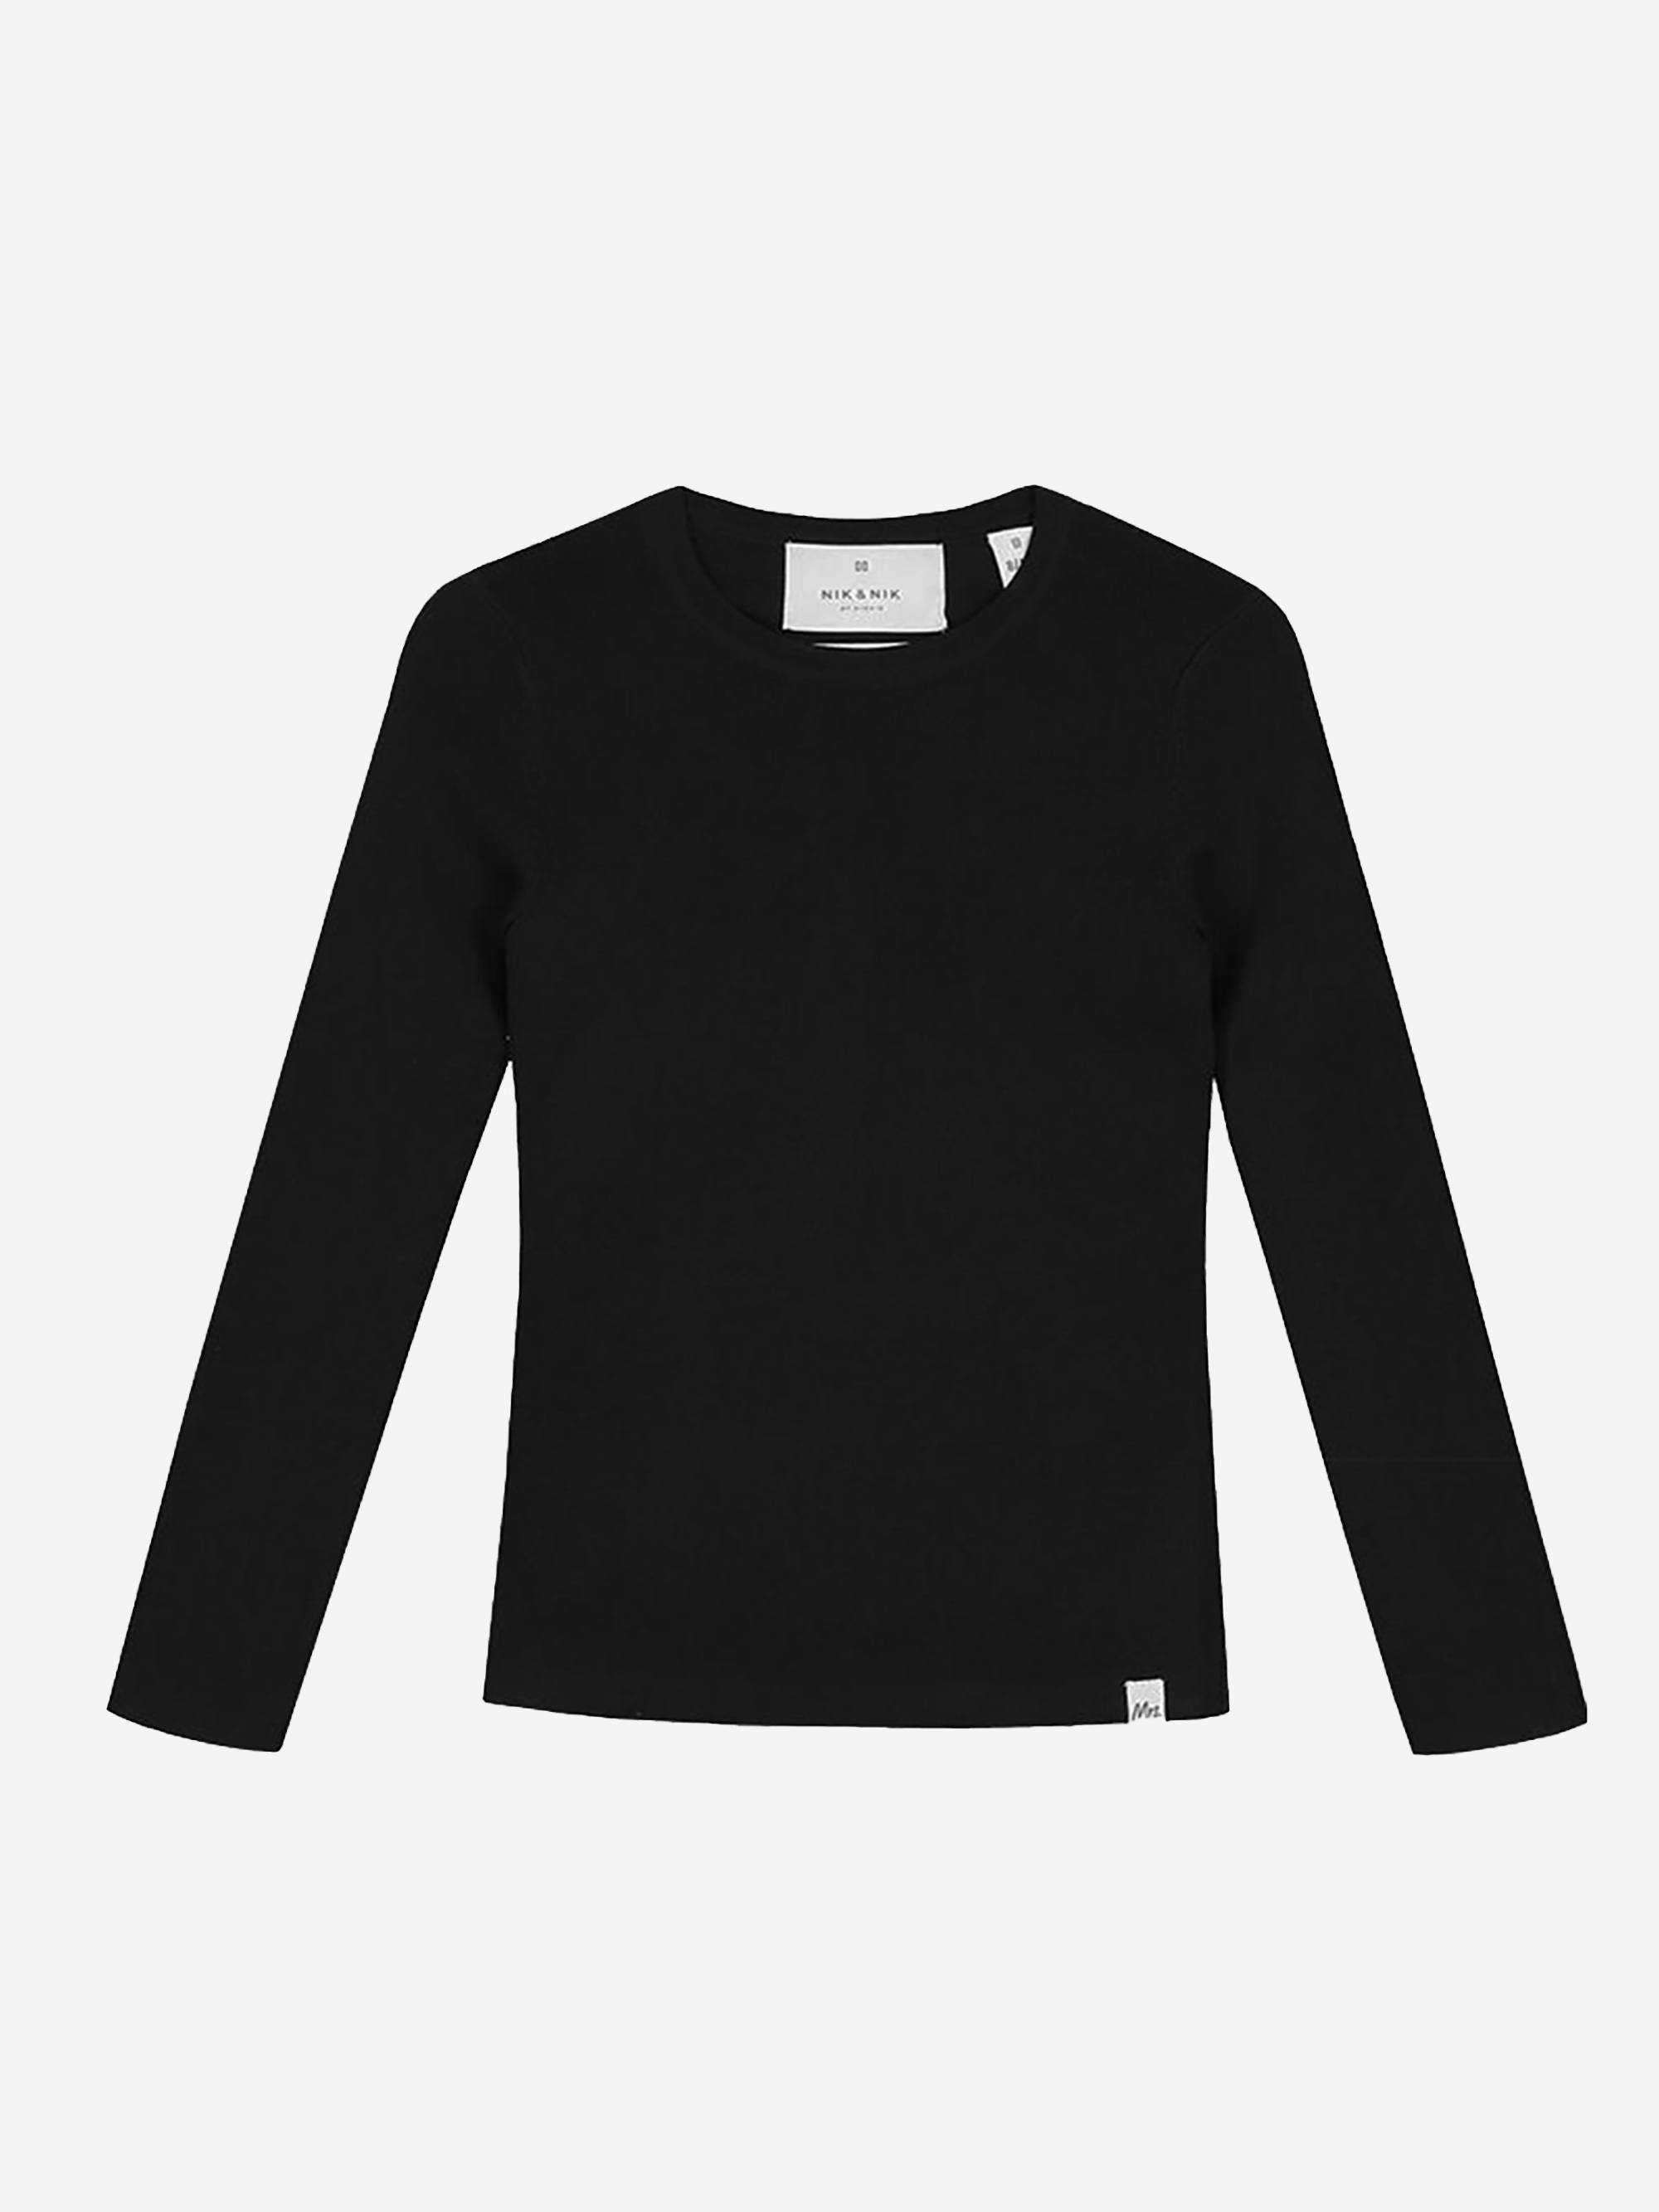 Black top with long sleeves